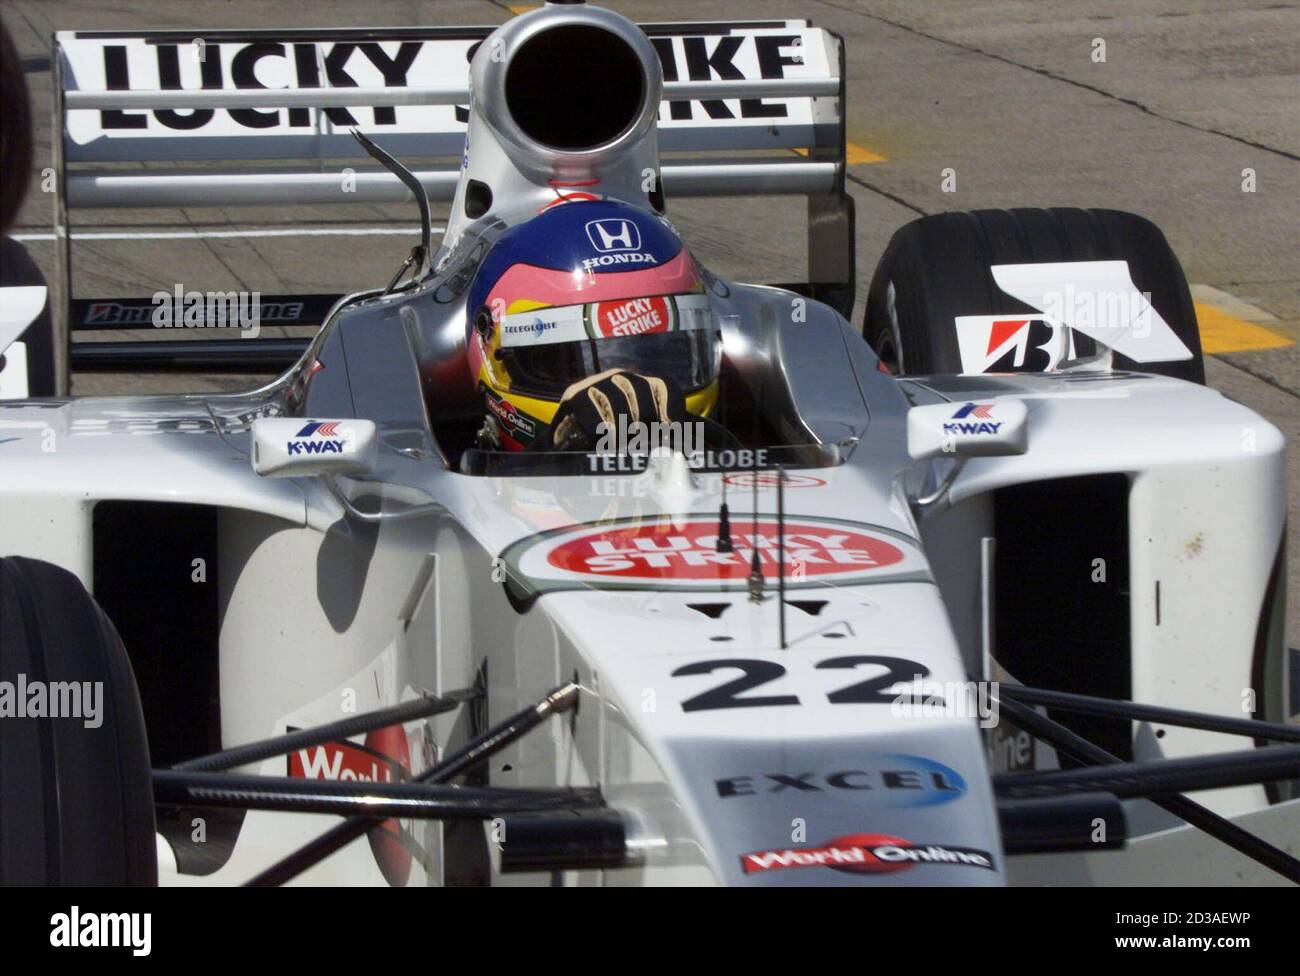 Canadian Jacques Villeneuve in a BAR Honda drives into his team pit during  a free practice run at Suzuka Circuit October 6, 2000 for the F1 Japanese  Grand Prix race on Sunday.